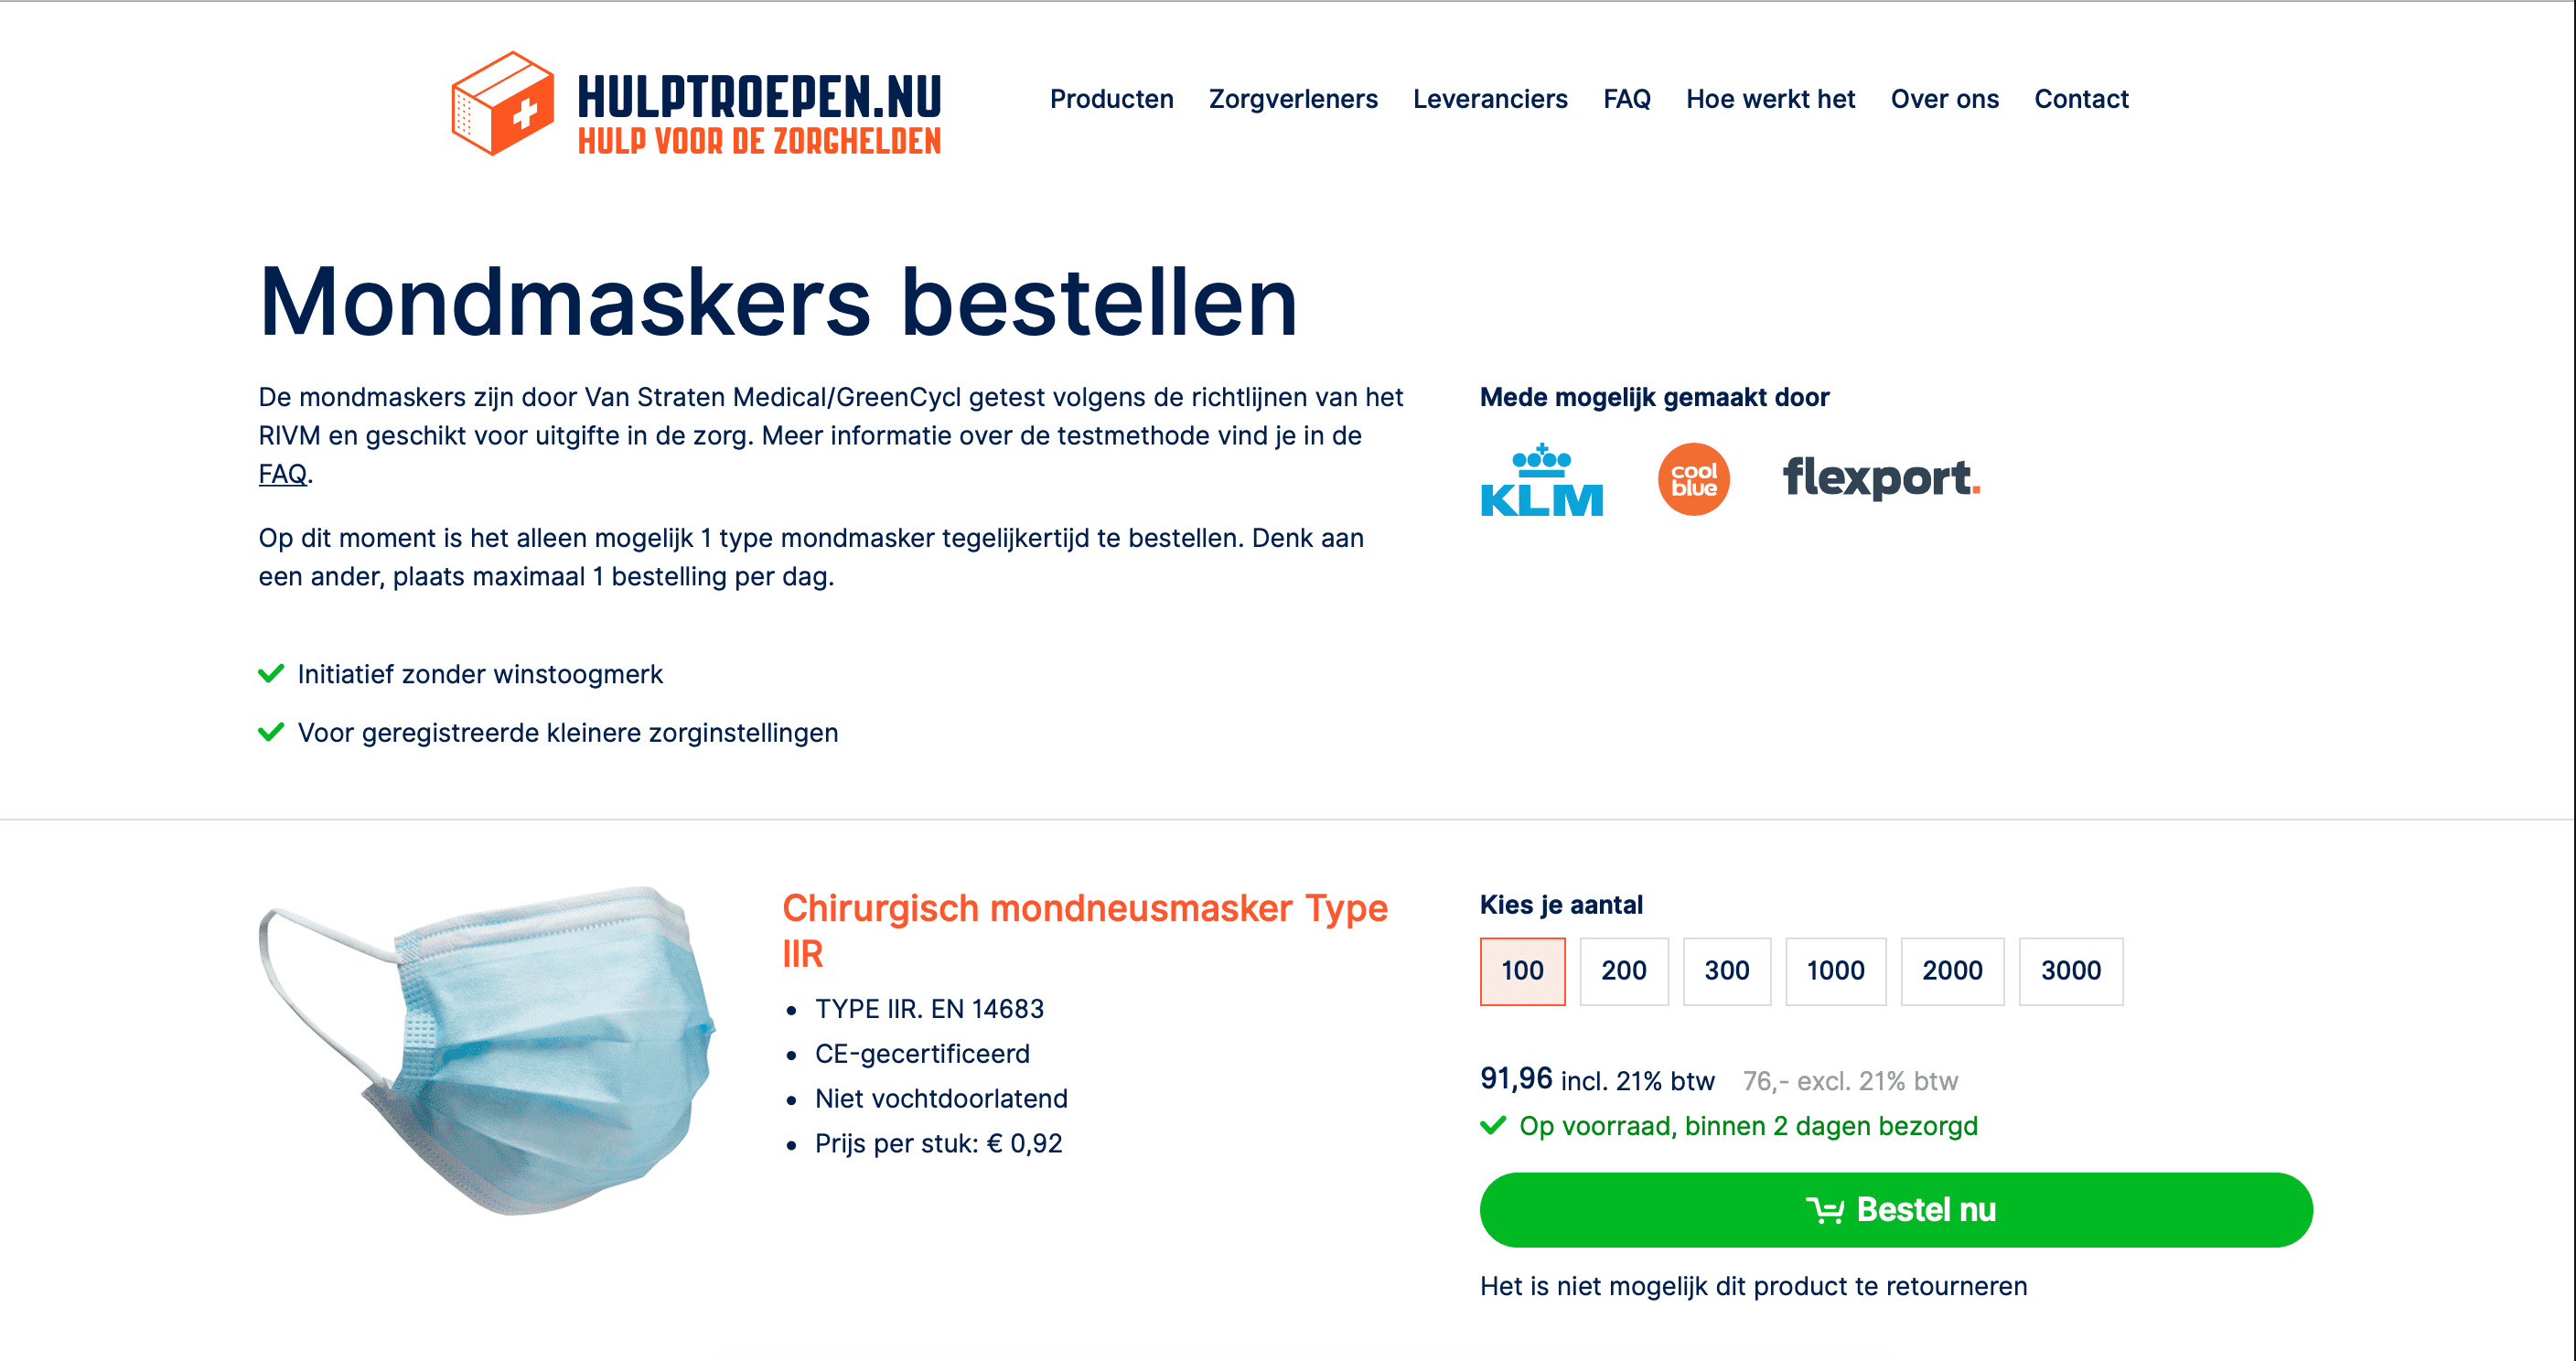 Hulptroepen formed to help protect frontline workers across The Netherlands.